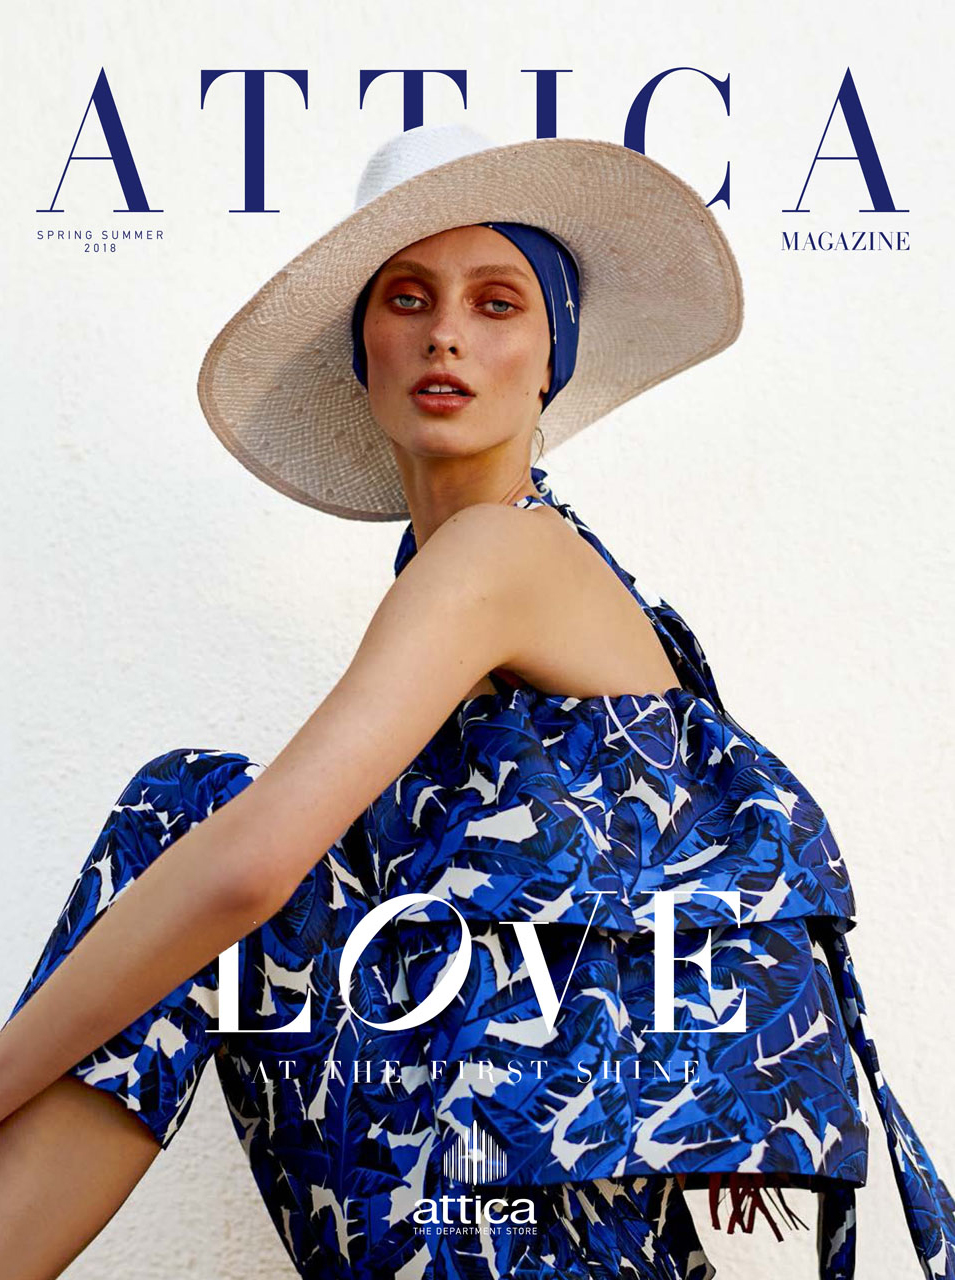 Vika Dunets on the cover of Attica Mag.